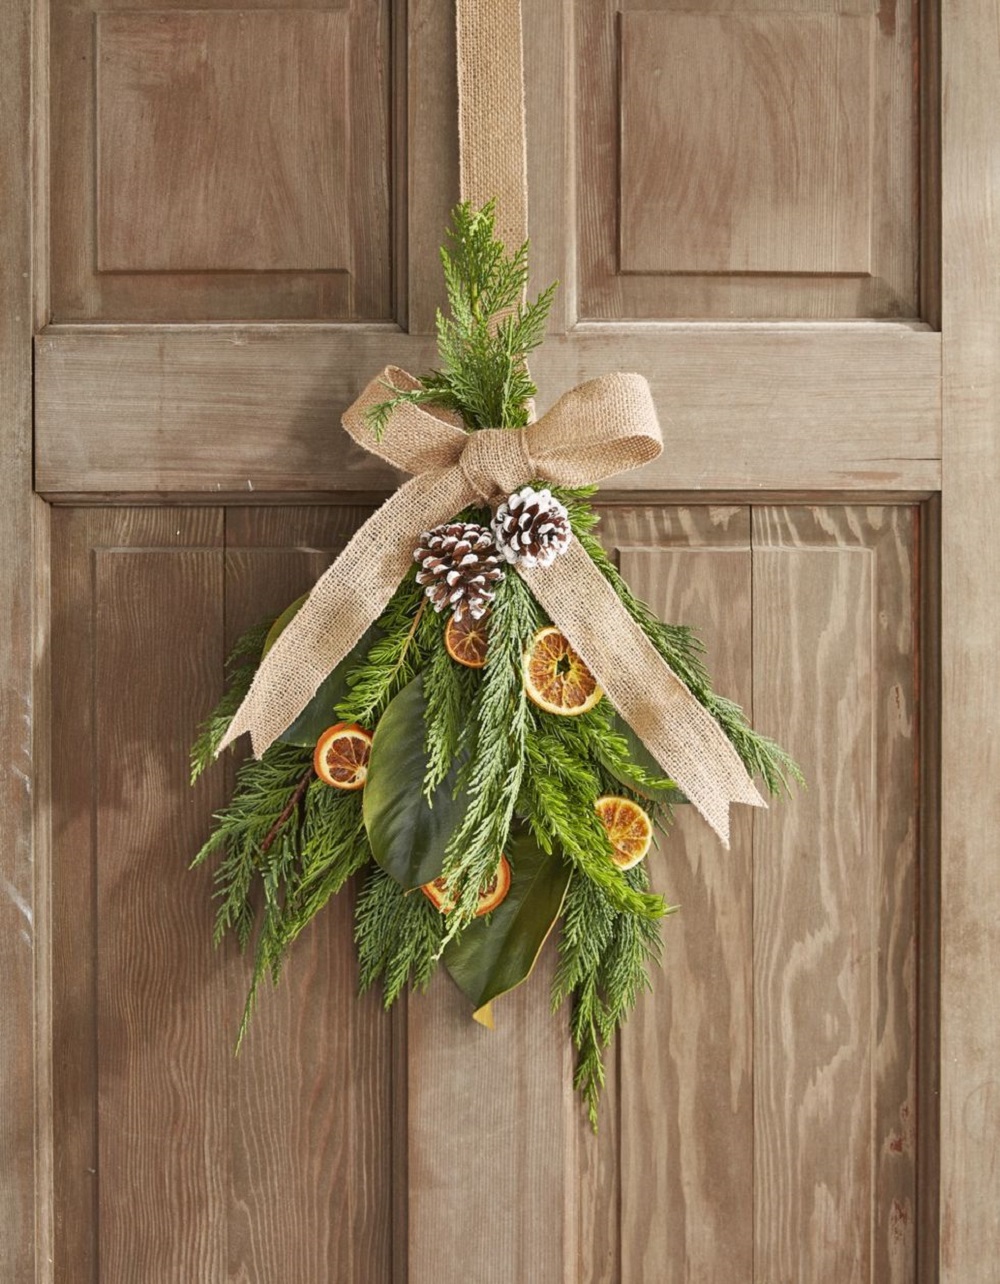 t6-1 Modern Christmas wreaths that you can decorate your home with